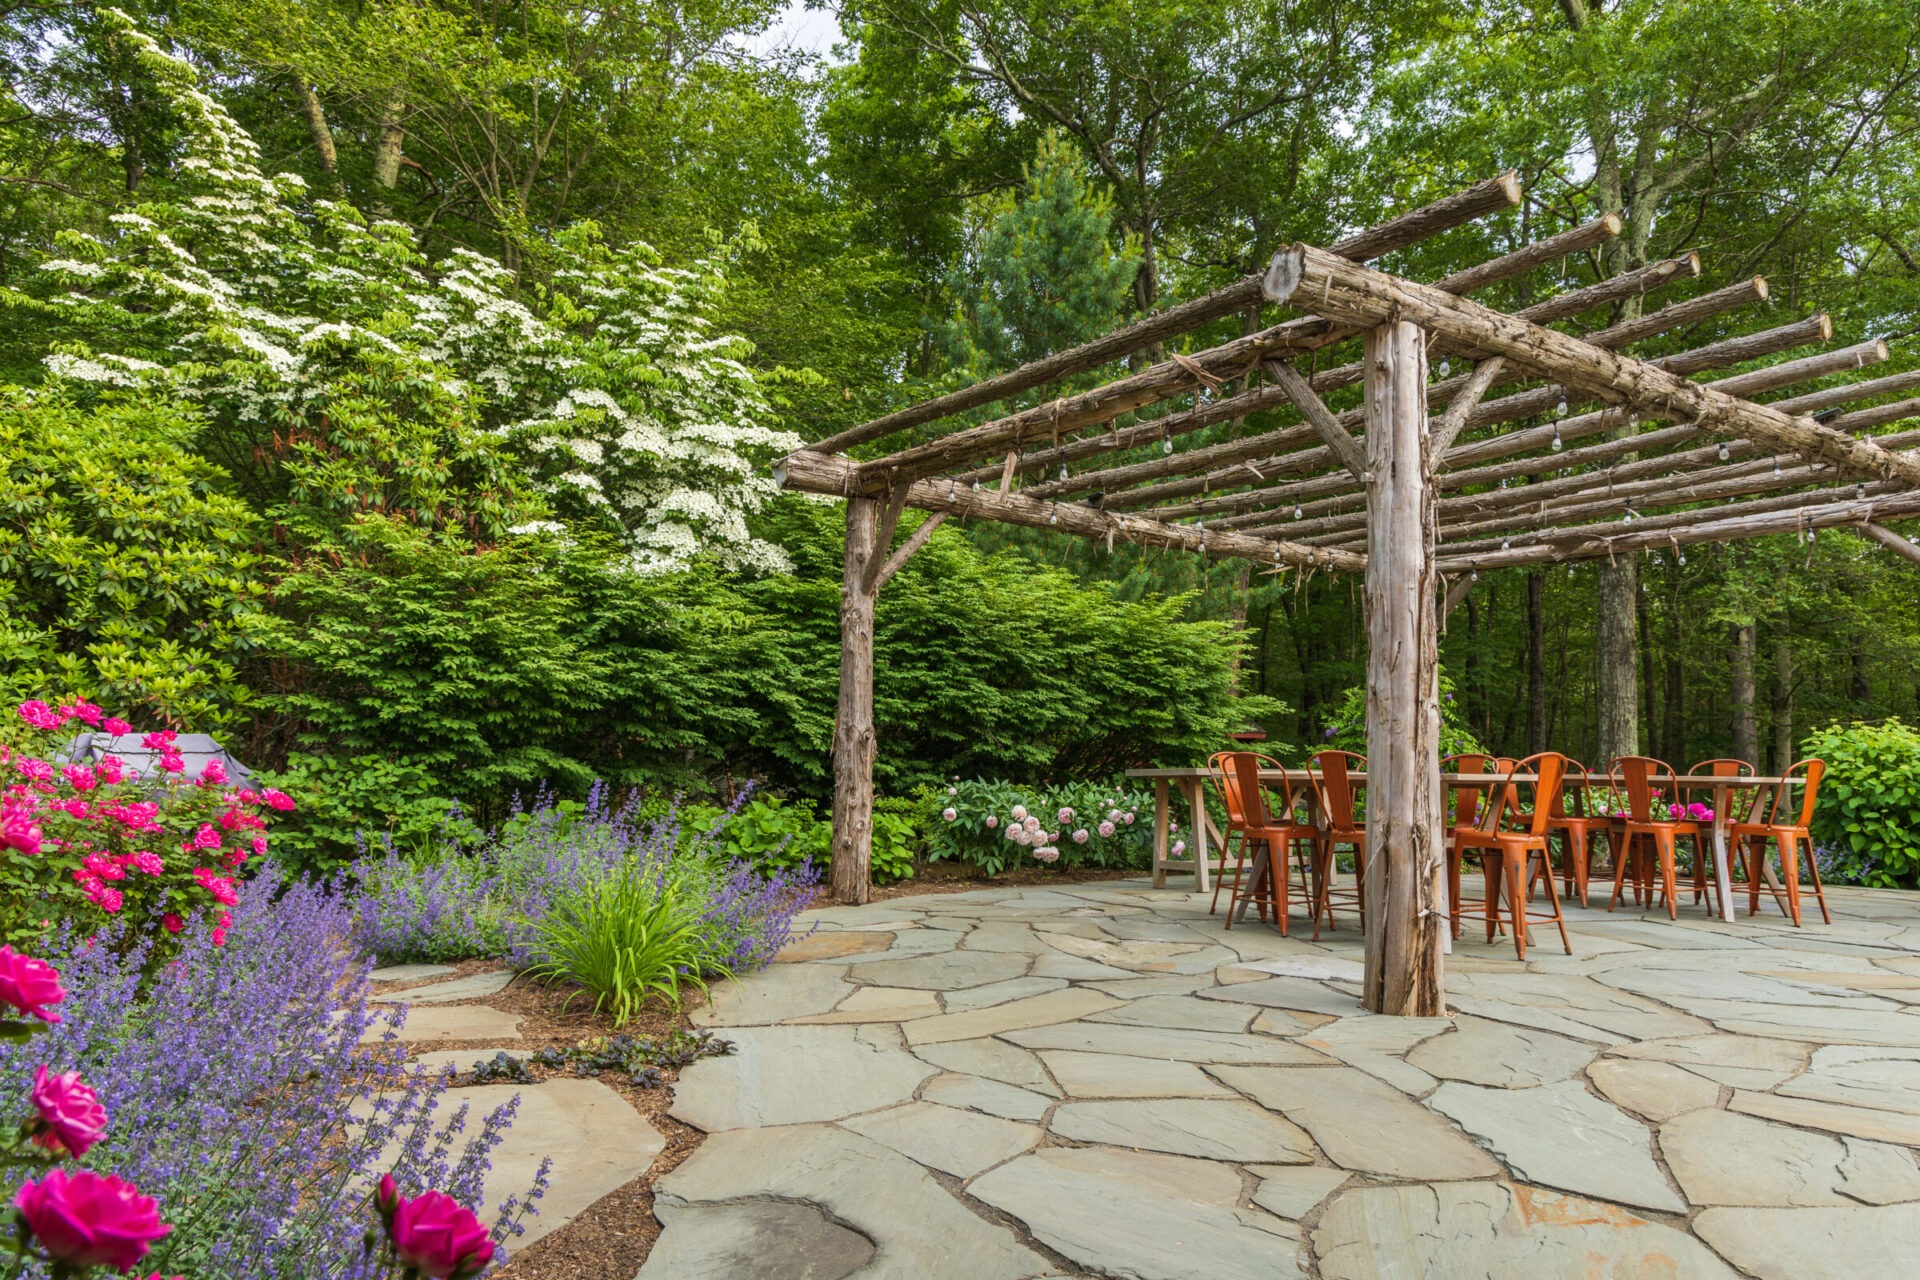 A serene garden patio with a wooden pergola, slate flooring, and blooming flowers. There's a table with chairs set up for outdoor dining.